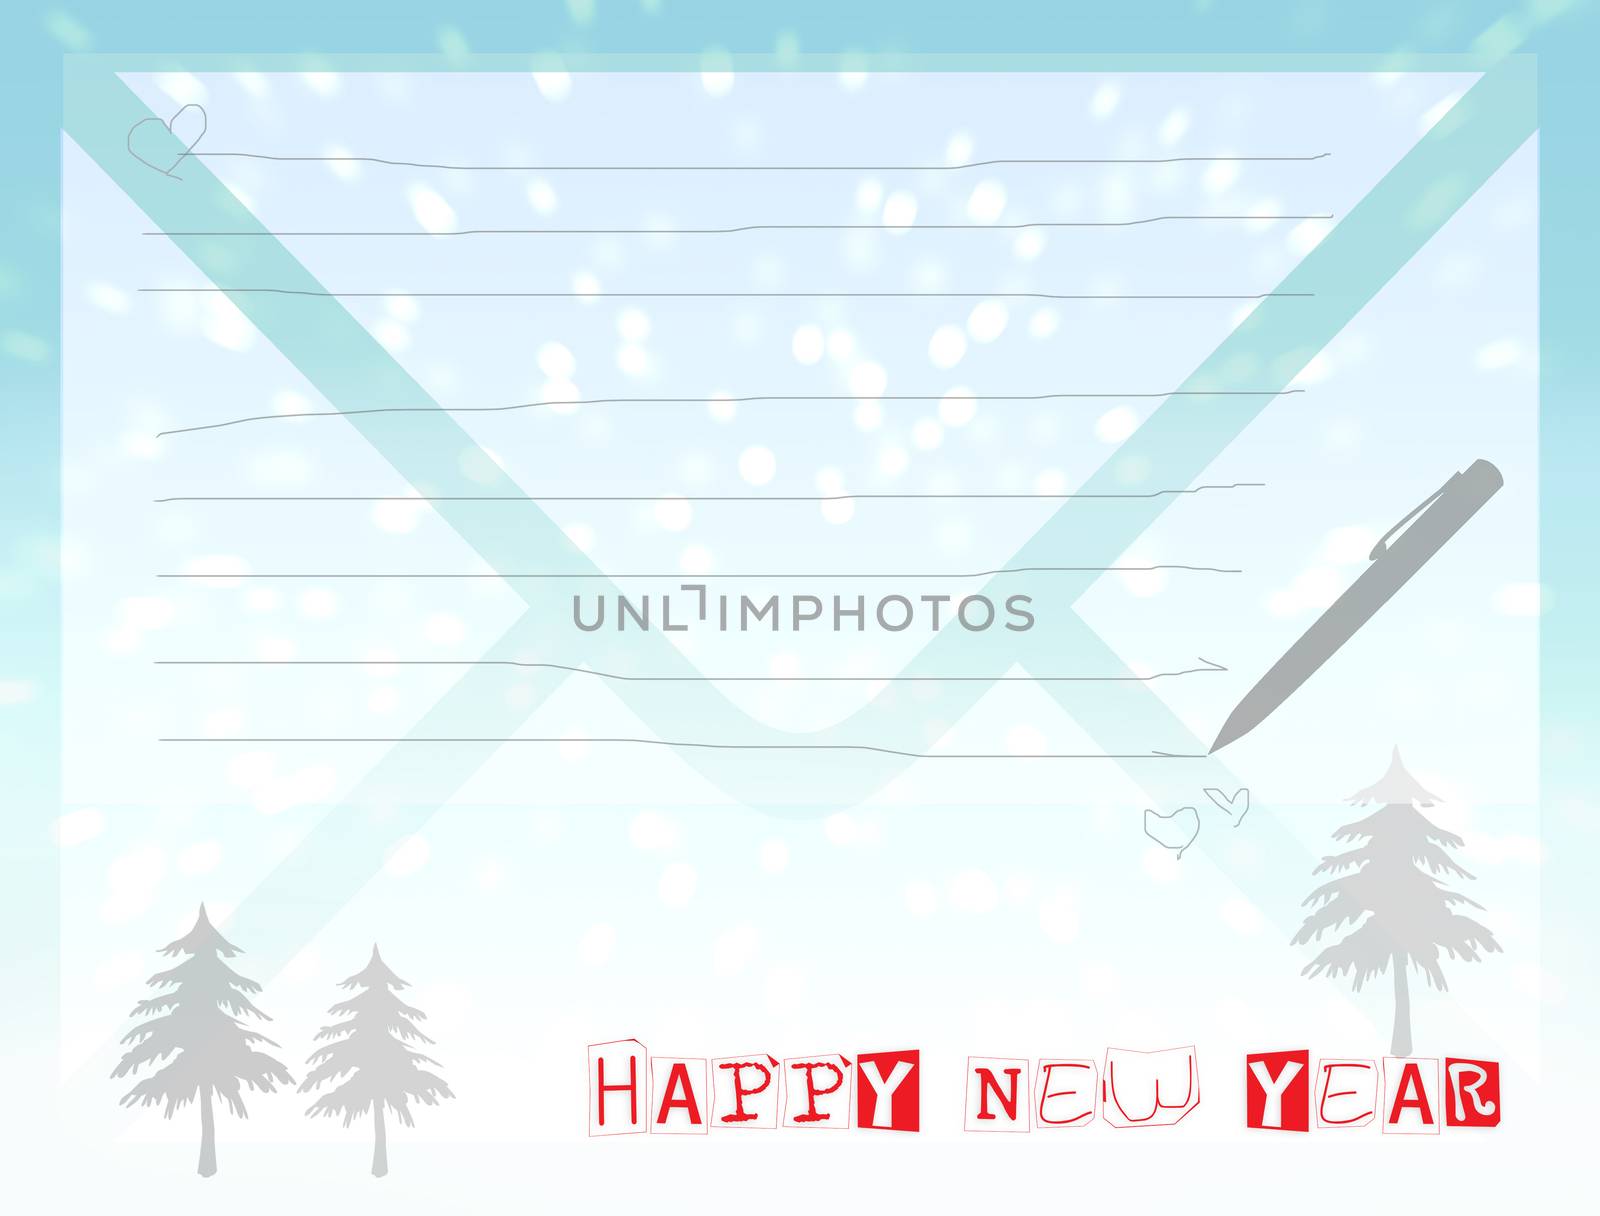 Happy new year 2014 cards by apichart